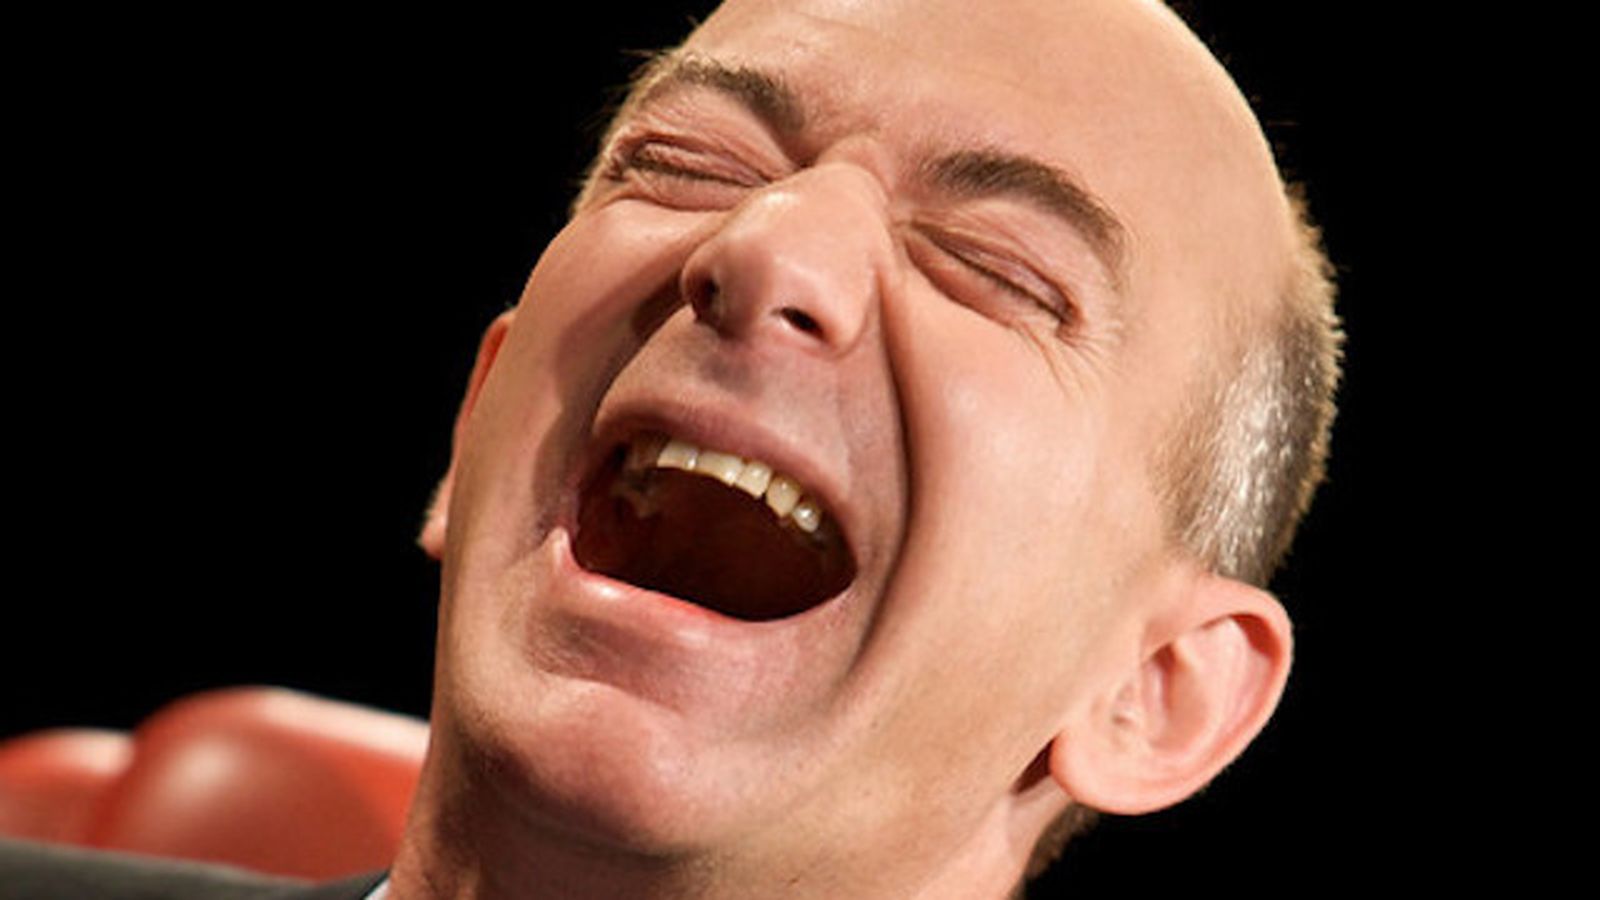 Jeff Bezos laughing hysterically Blank Template - Imgflip